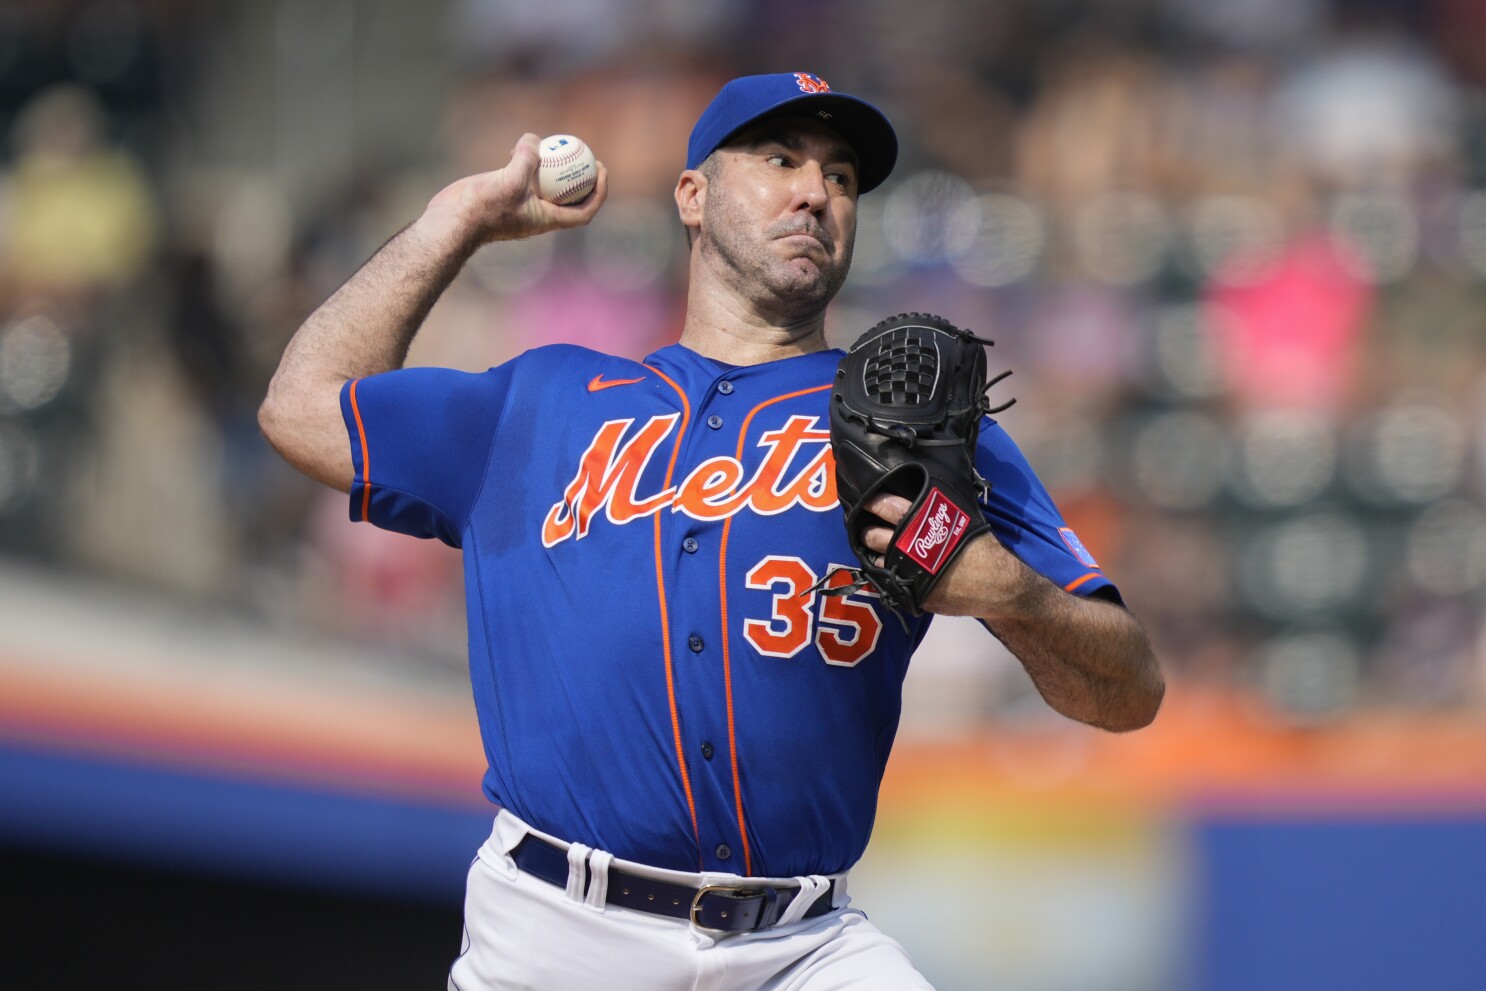 Verlander gets 1st win with Mets, goes 30 for 30 in MLB, as Alonso homer  helps NY edge Reds 2-1 - The San Diego Union-Tribune